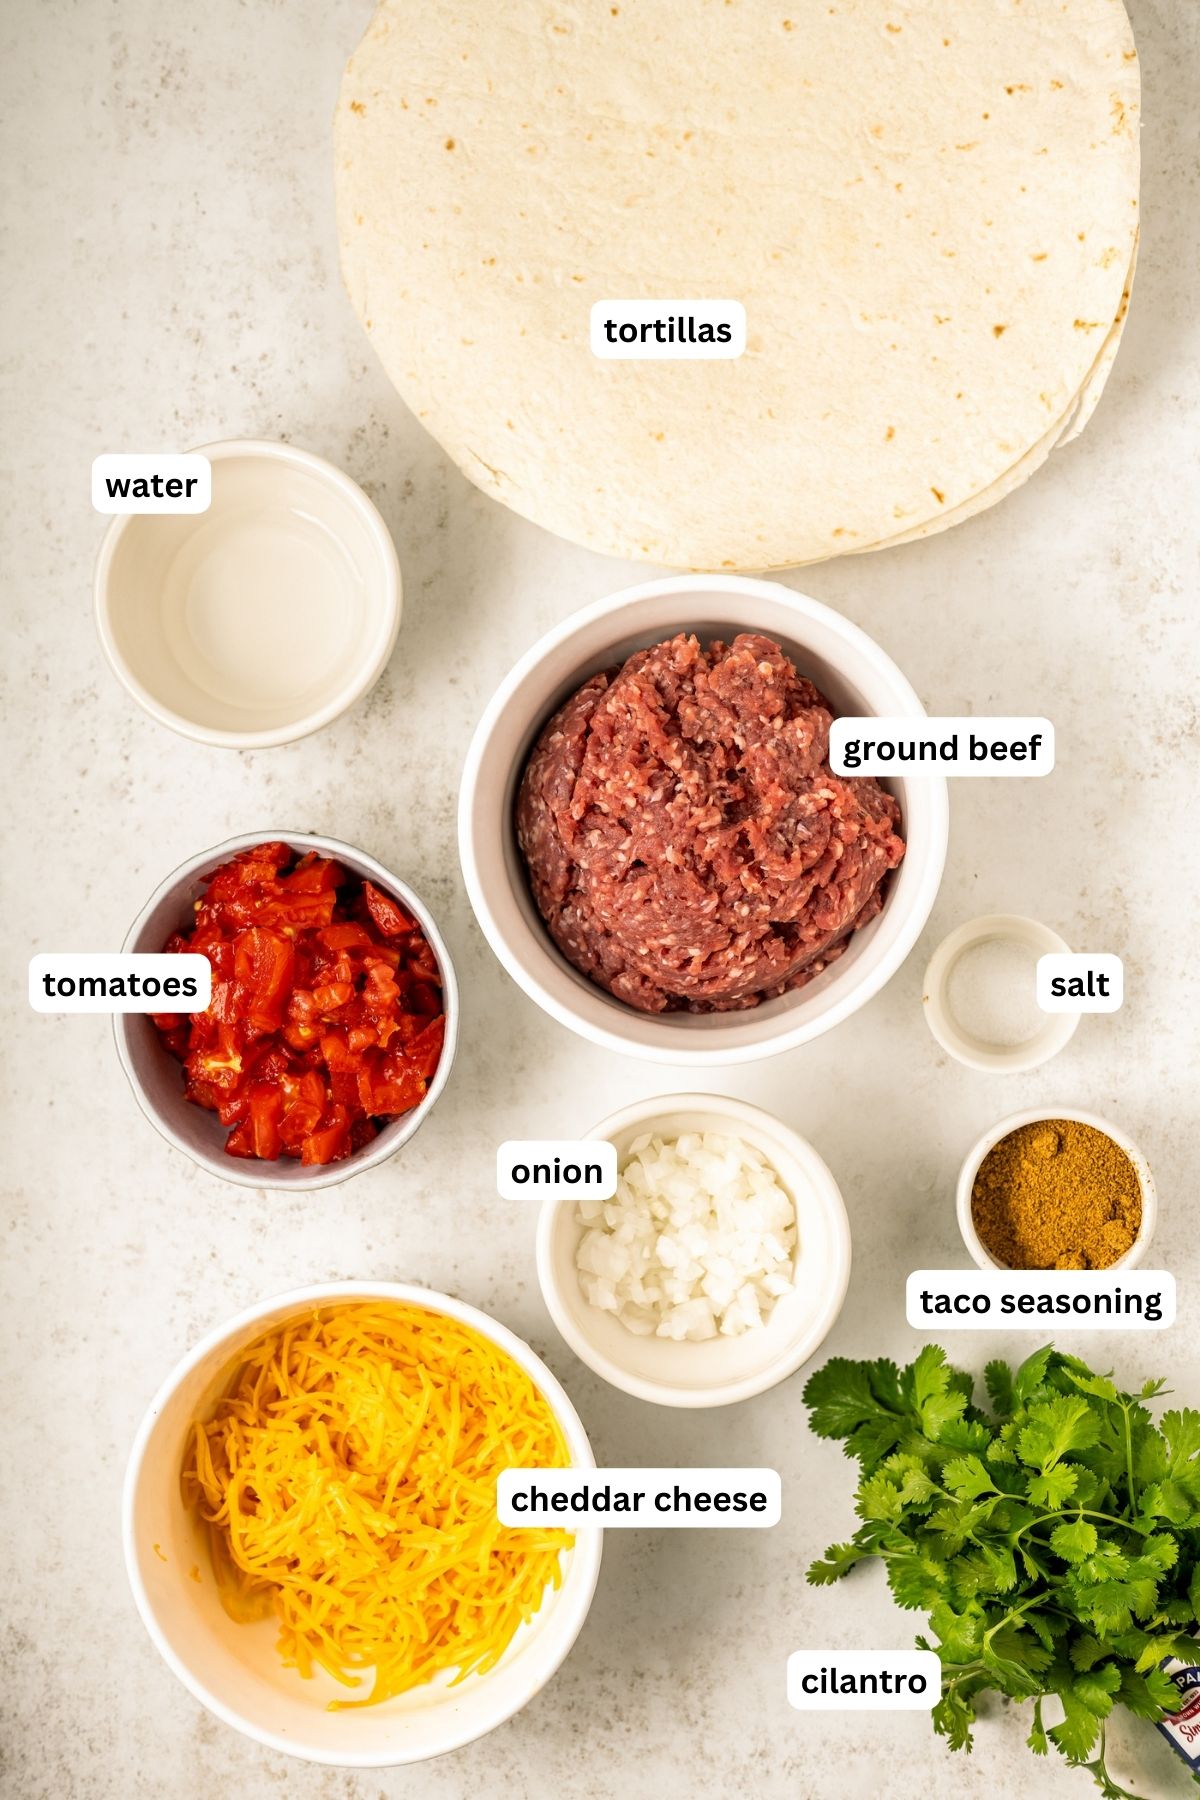 Ingredients arranged in bowls for Taco Bell Meximelt recipe, from top to bottom: tortillas, water, ground beef, tomatoes, salt, onion, taco seasoning, cheddar cheese and cilantro.